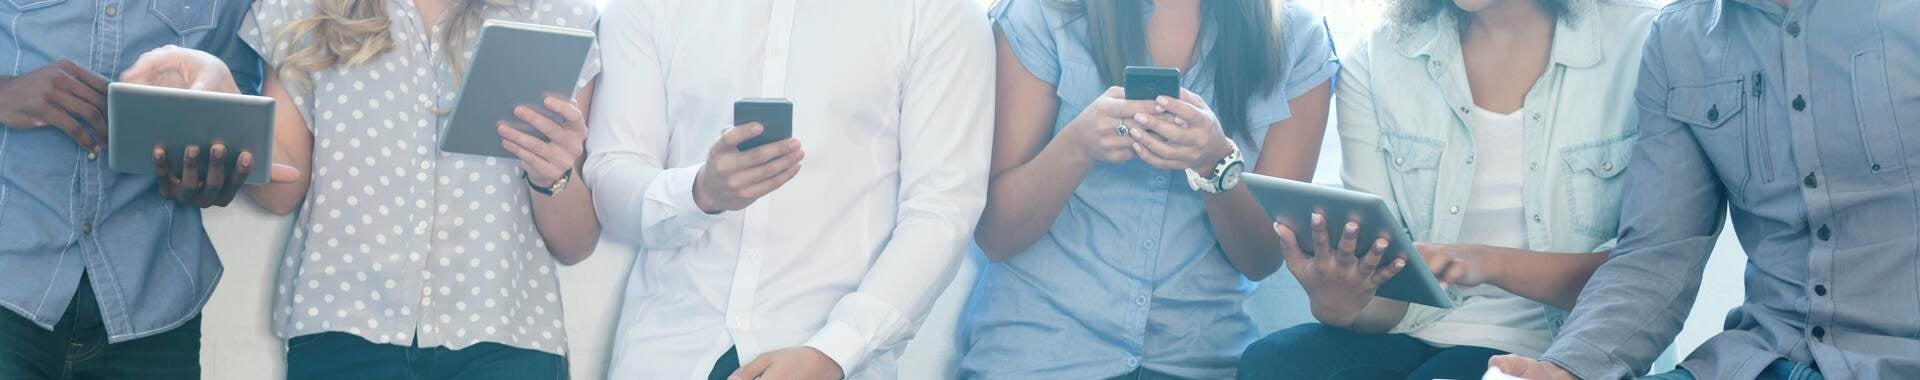 Young People holding smartphones